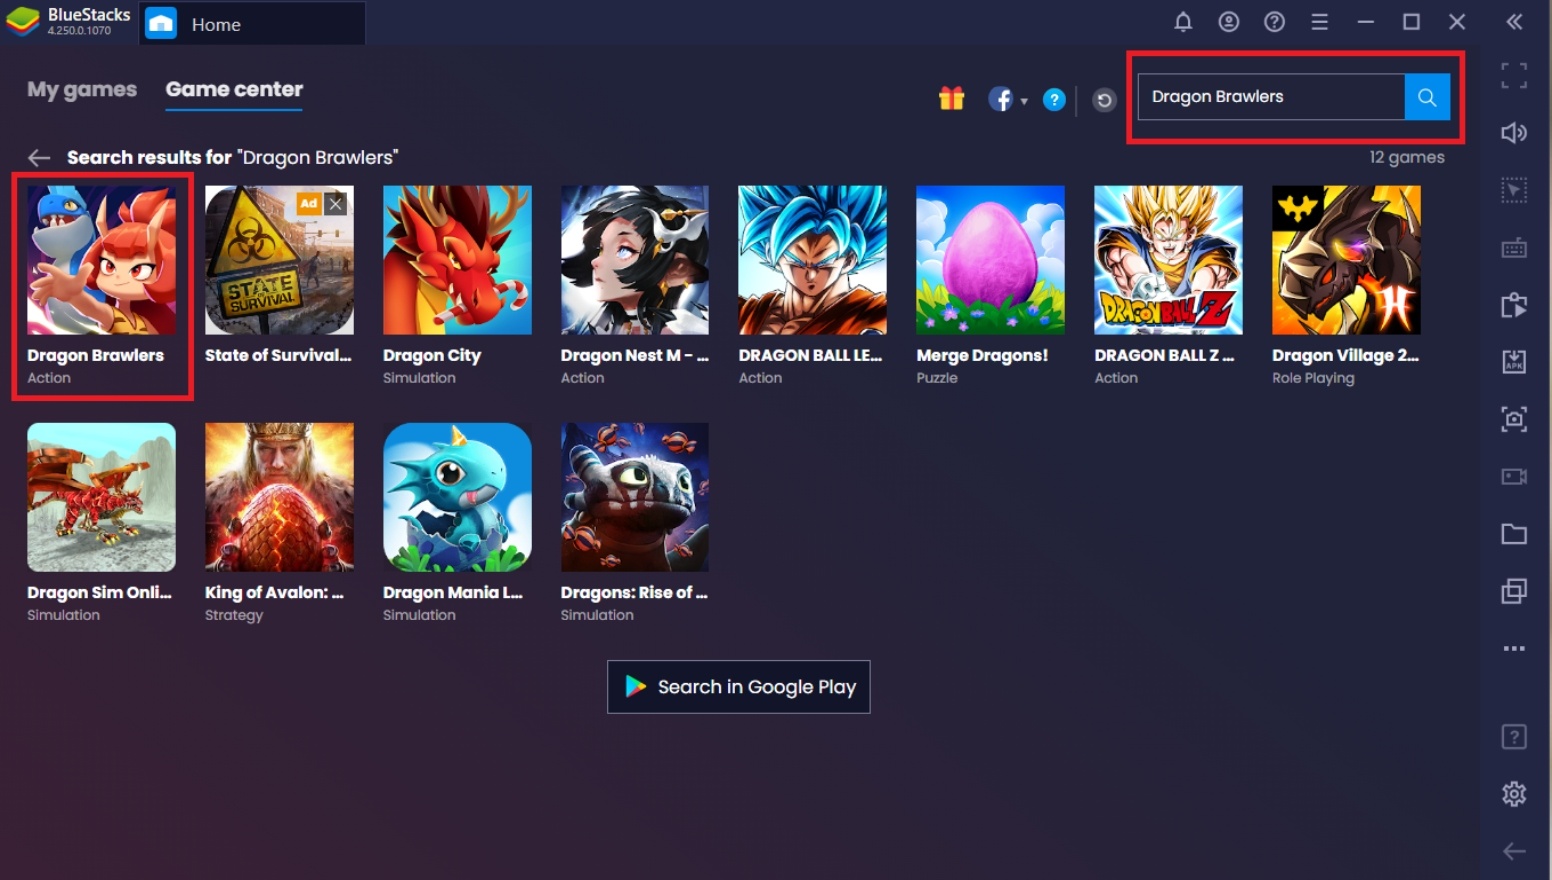 How to Play Dragon Brawlers On PC With BlueStacks